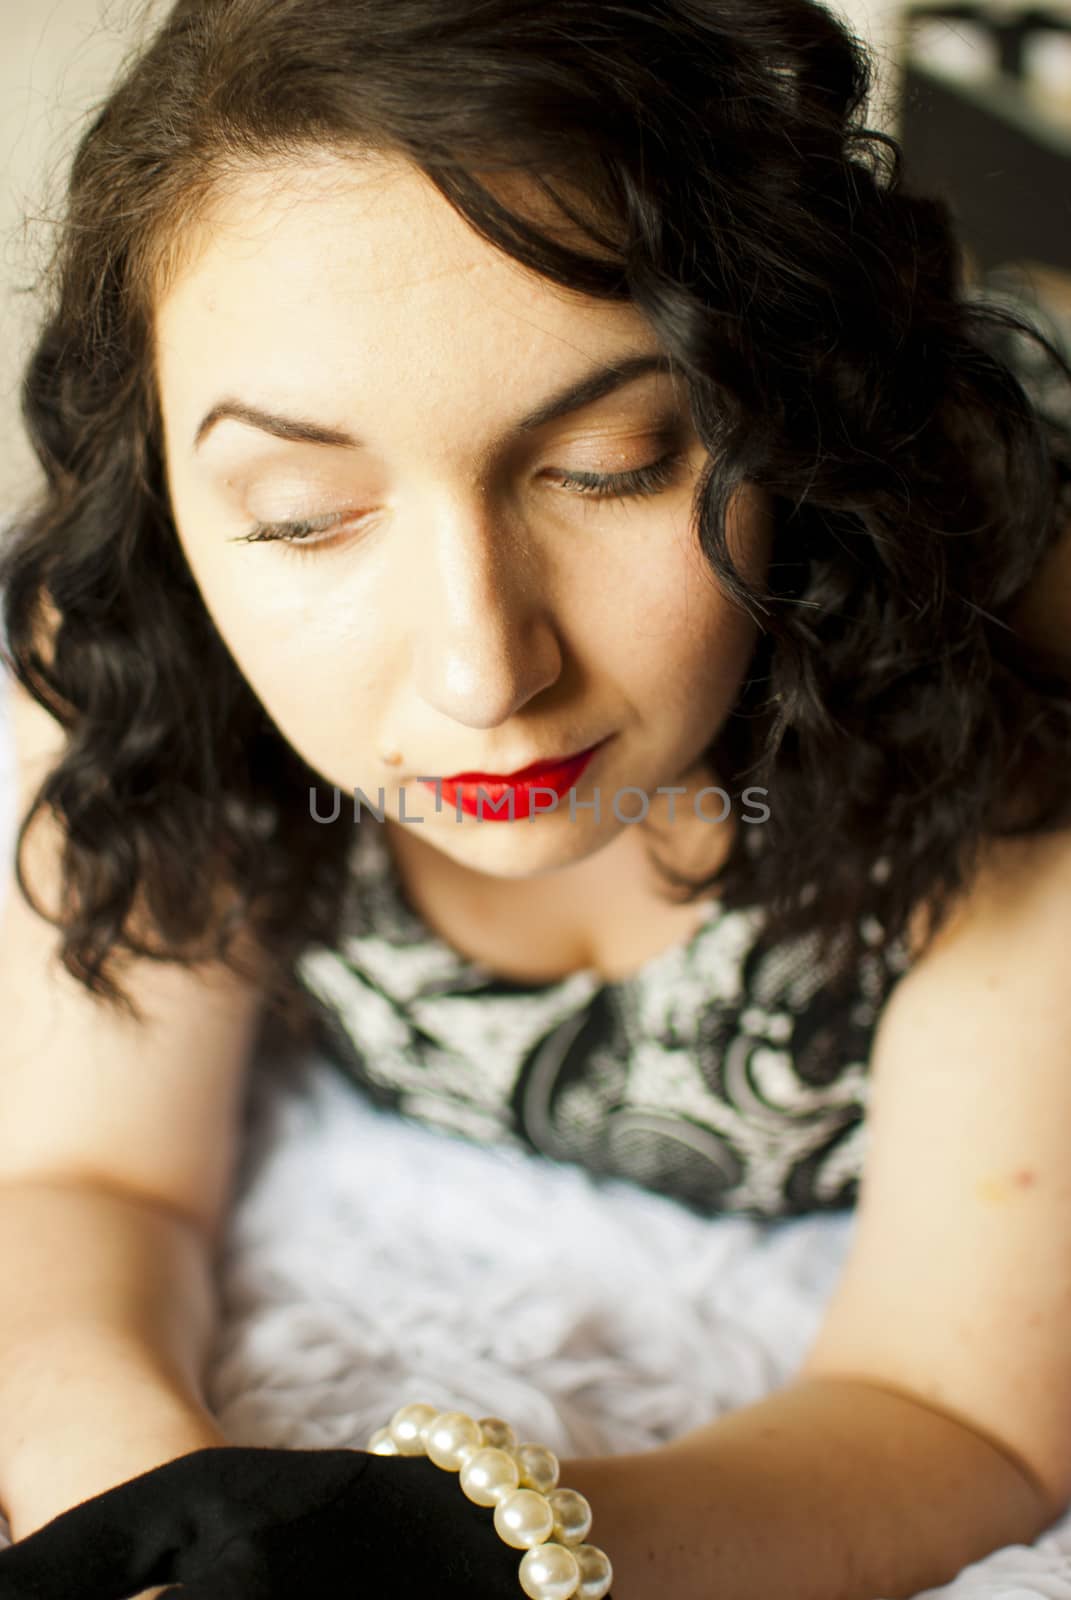 sansual retro girl portrait lying on a bed